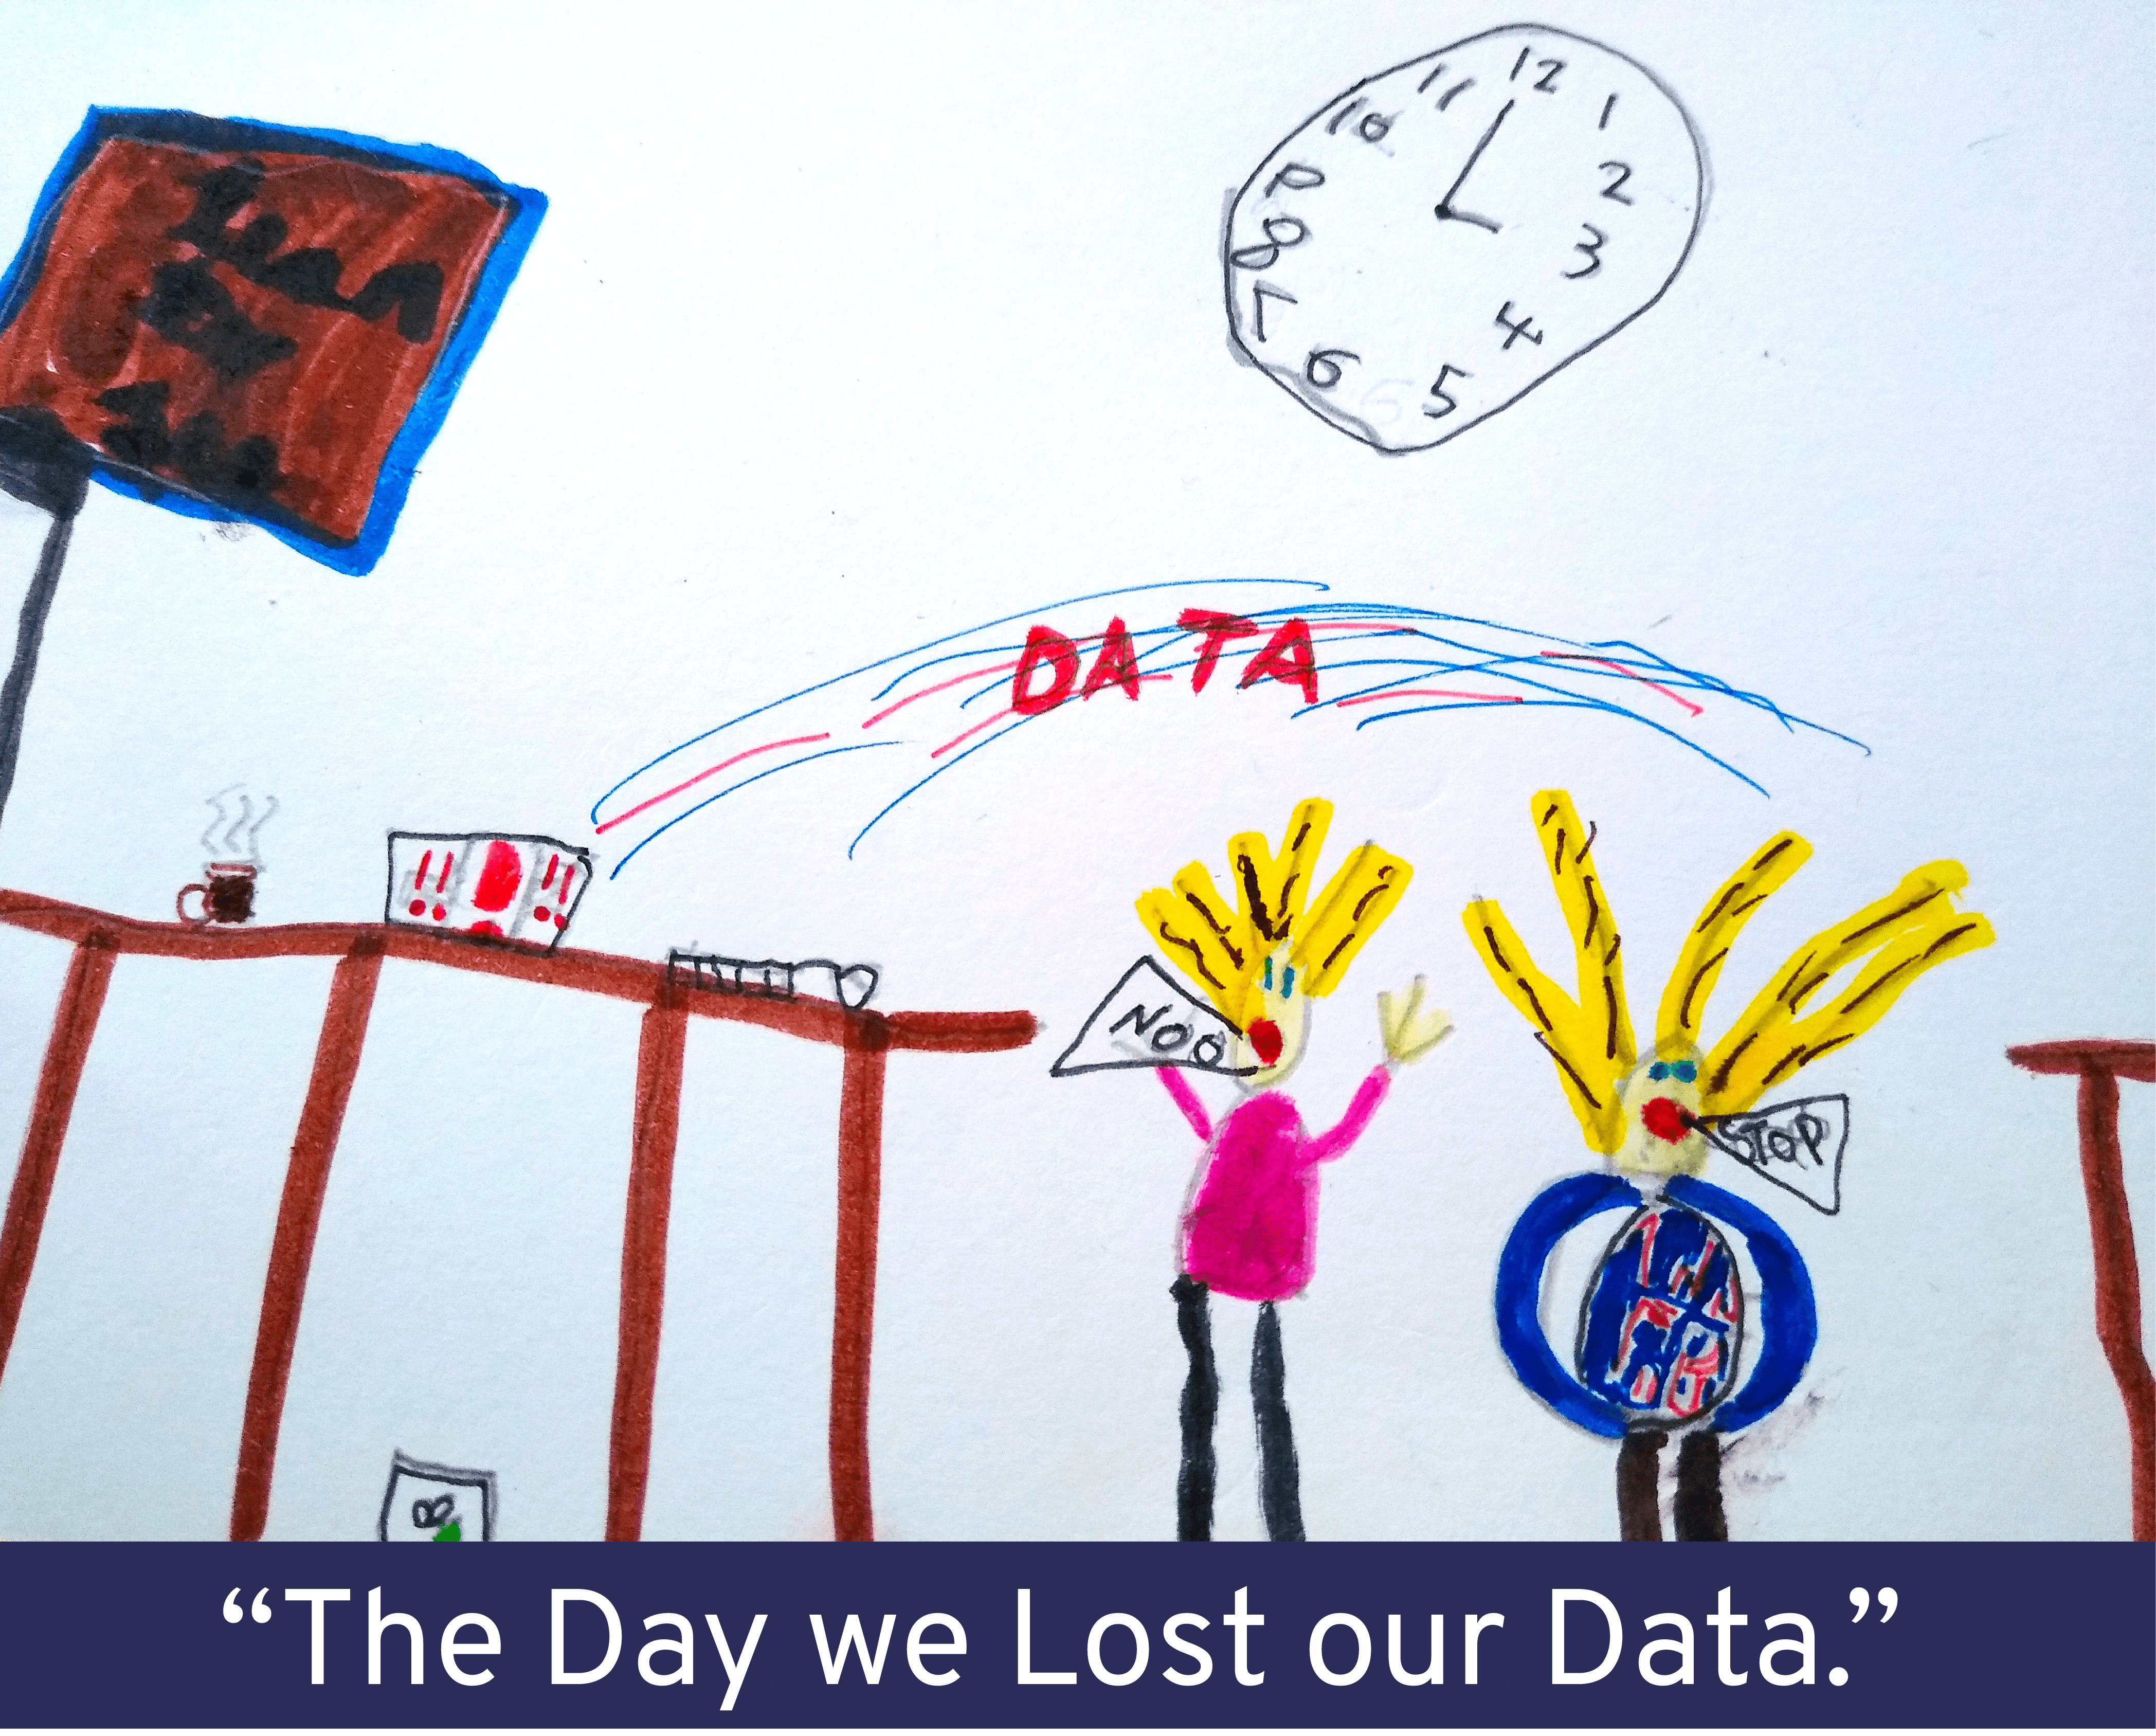 The Day we Lost our Data